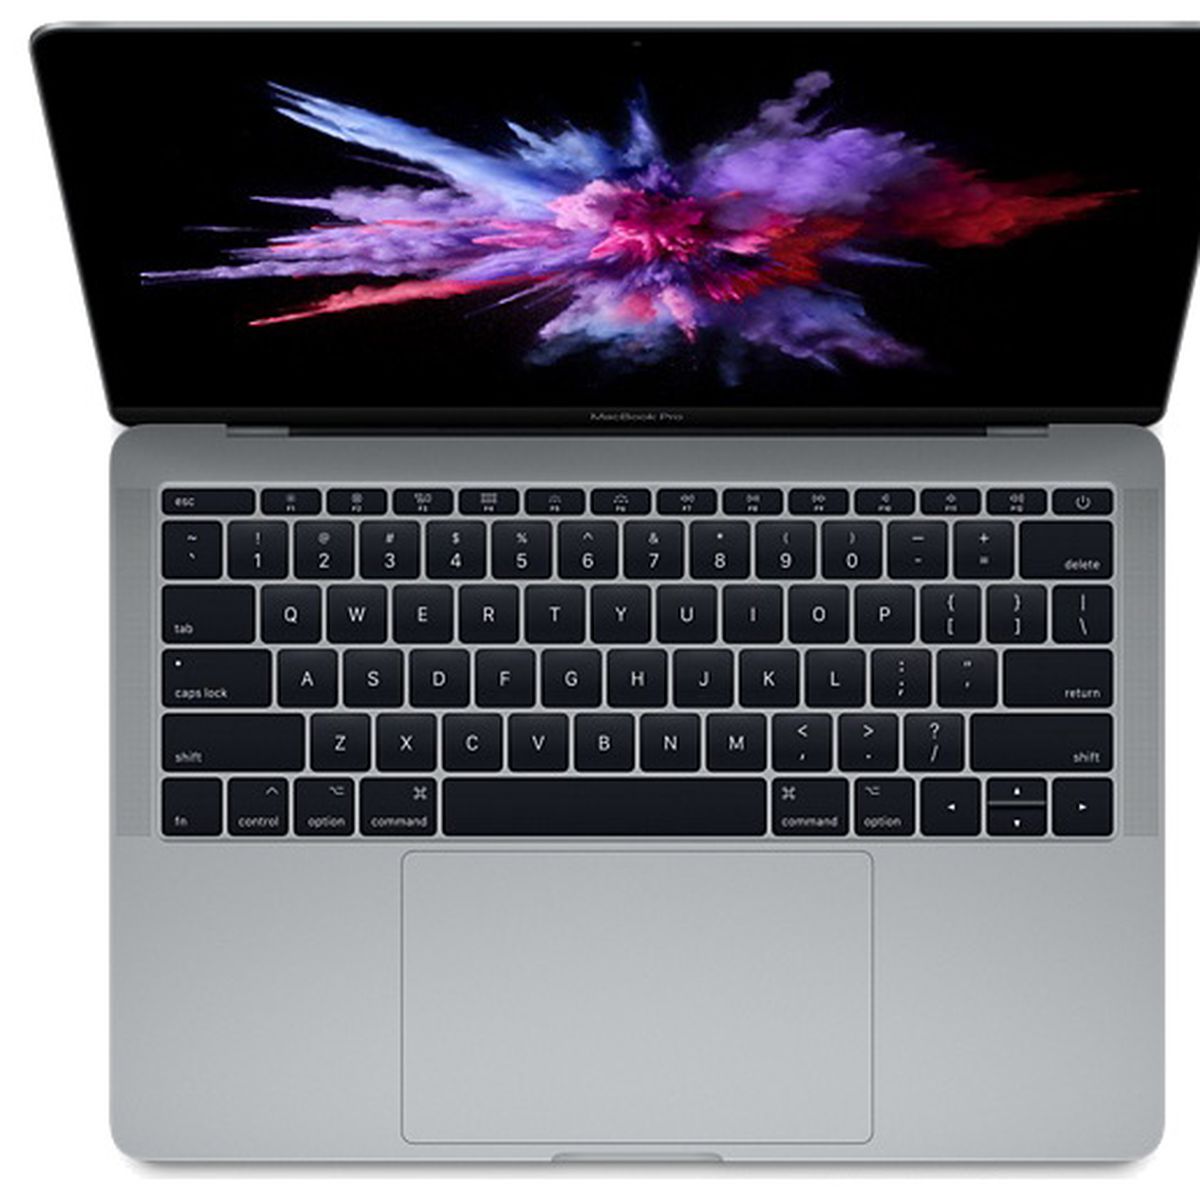 Cyclops salt laser Apple Identifies Limited Hardware Issue With 2017 13" MacBook Pro Models  With Function Keys - MacRumors